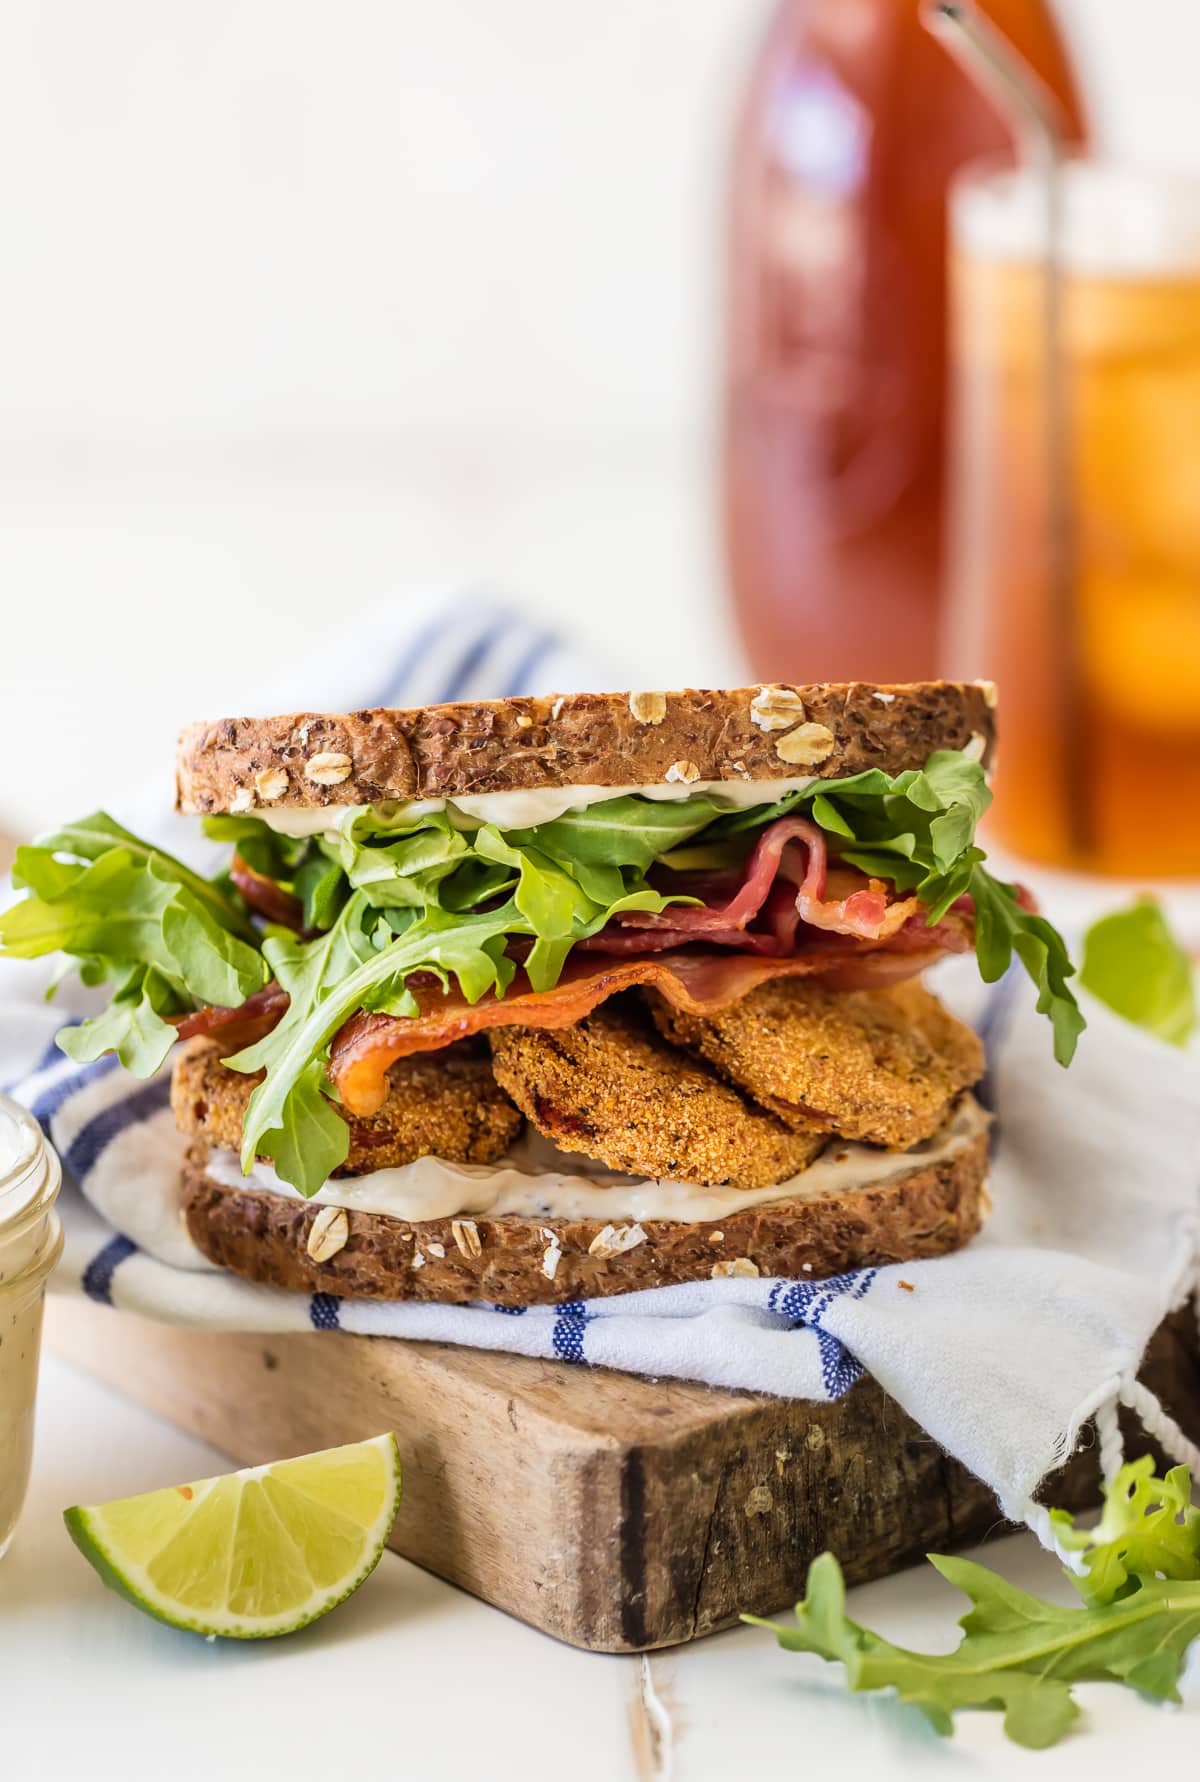 A BLT sandwich made with fried tomatoes and arugula 